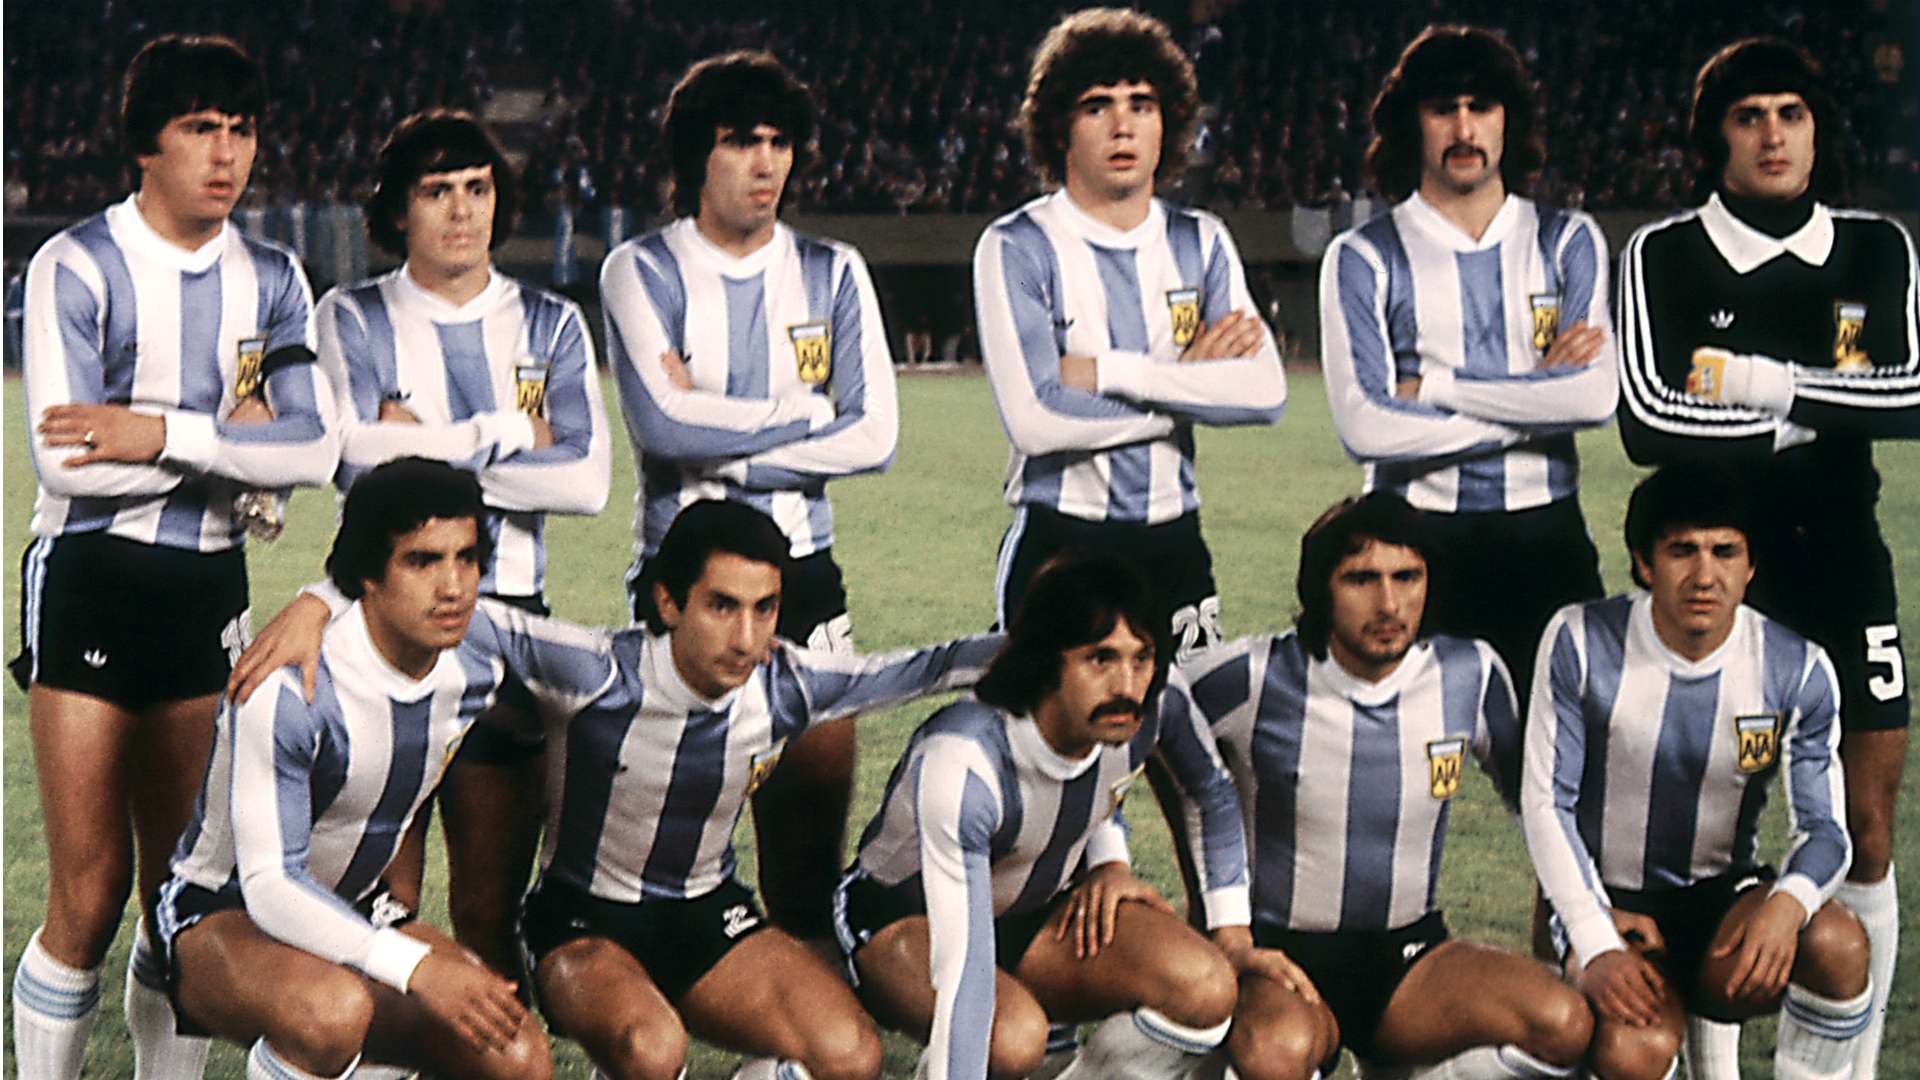 Argentina World Cup 1978